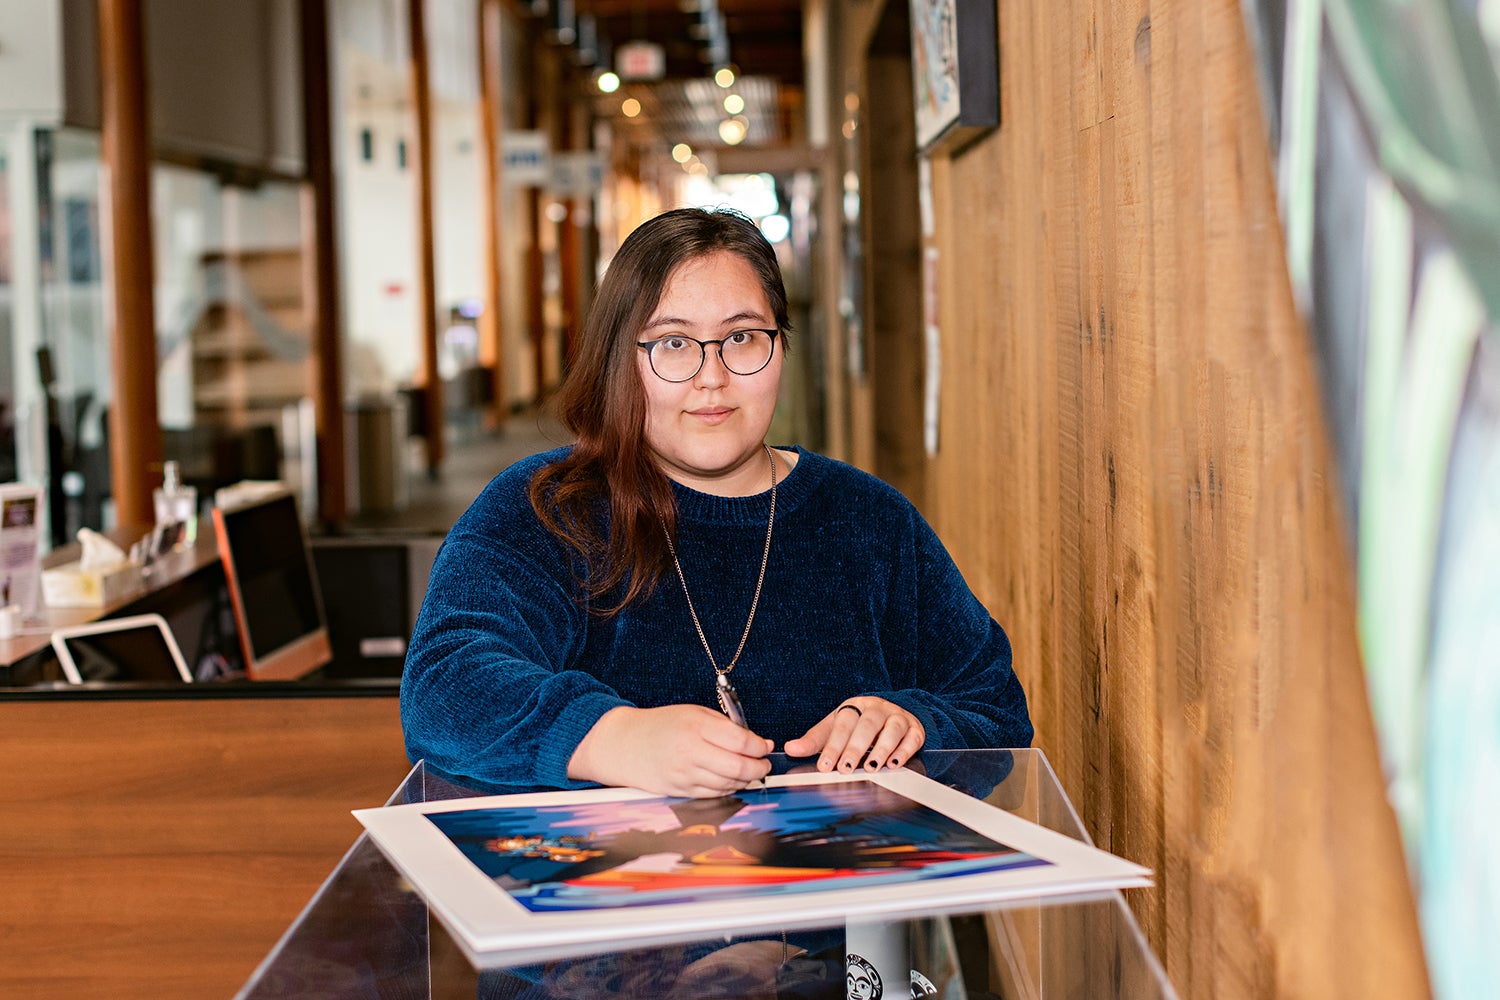 Kayla signing a lithograph of the Crow and The Native Spirit at the Kwanlin Dun Cultural Centre in Whitehorse.. They are sitting down and looking at the camera. The hallway blurs in the background, but looks to be made predominantly of Wood walls, and large glass windows.